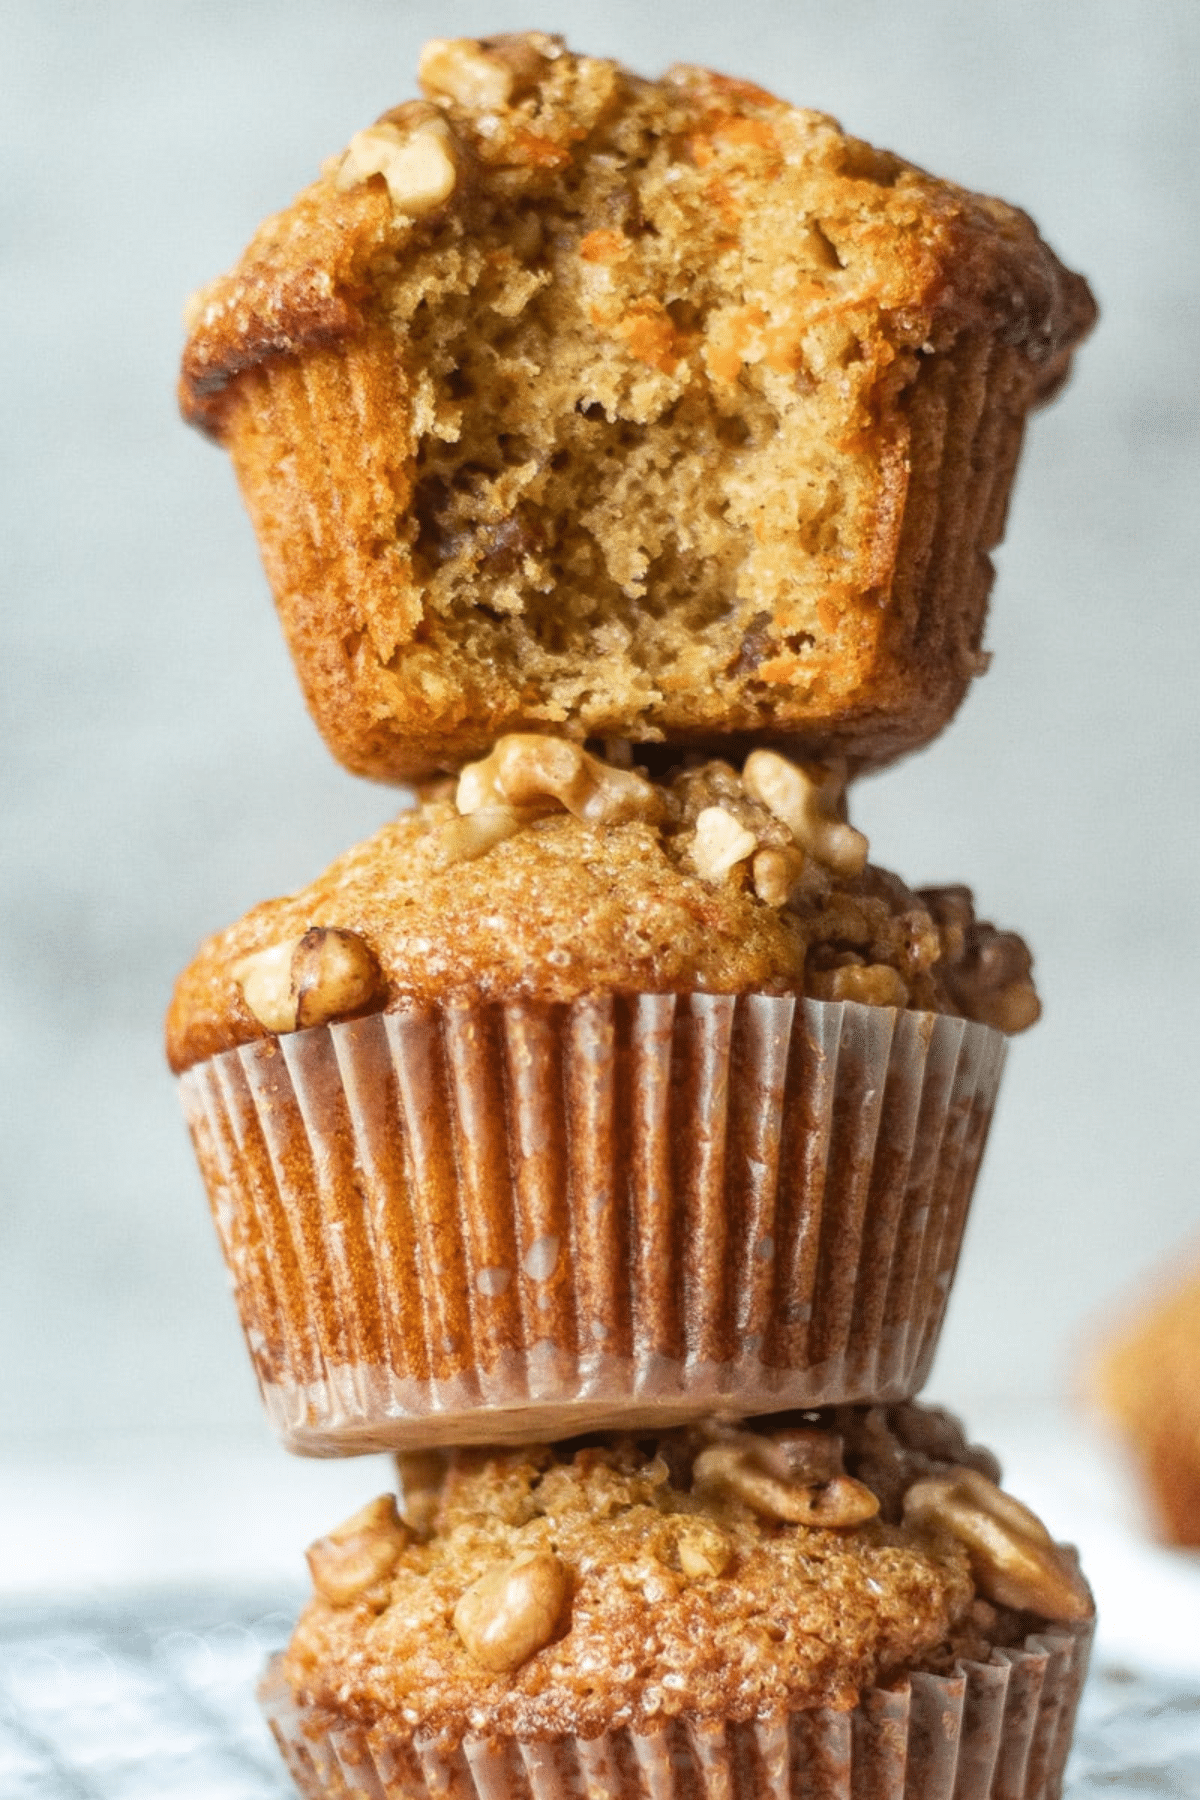 Banana Carrot Muffins stacked on each other.